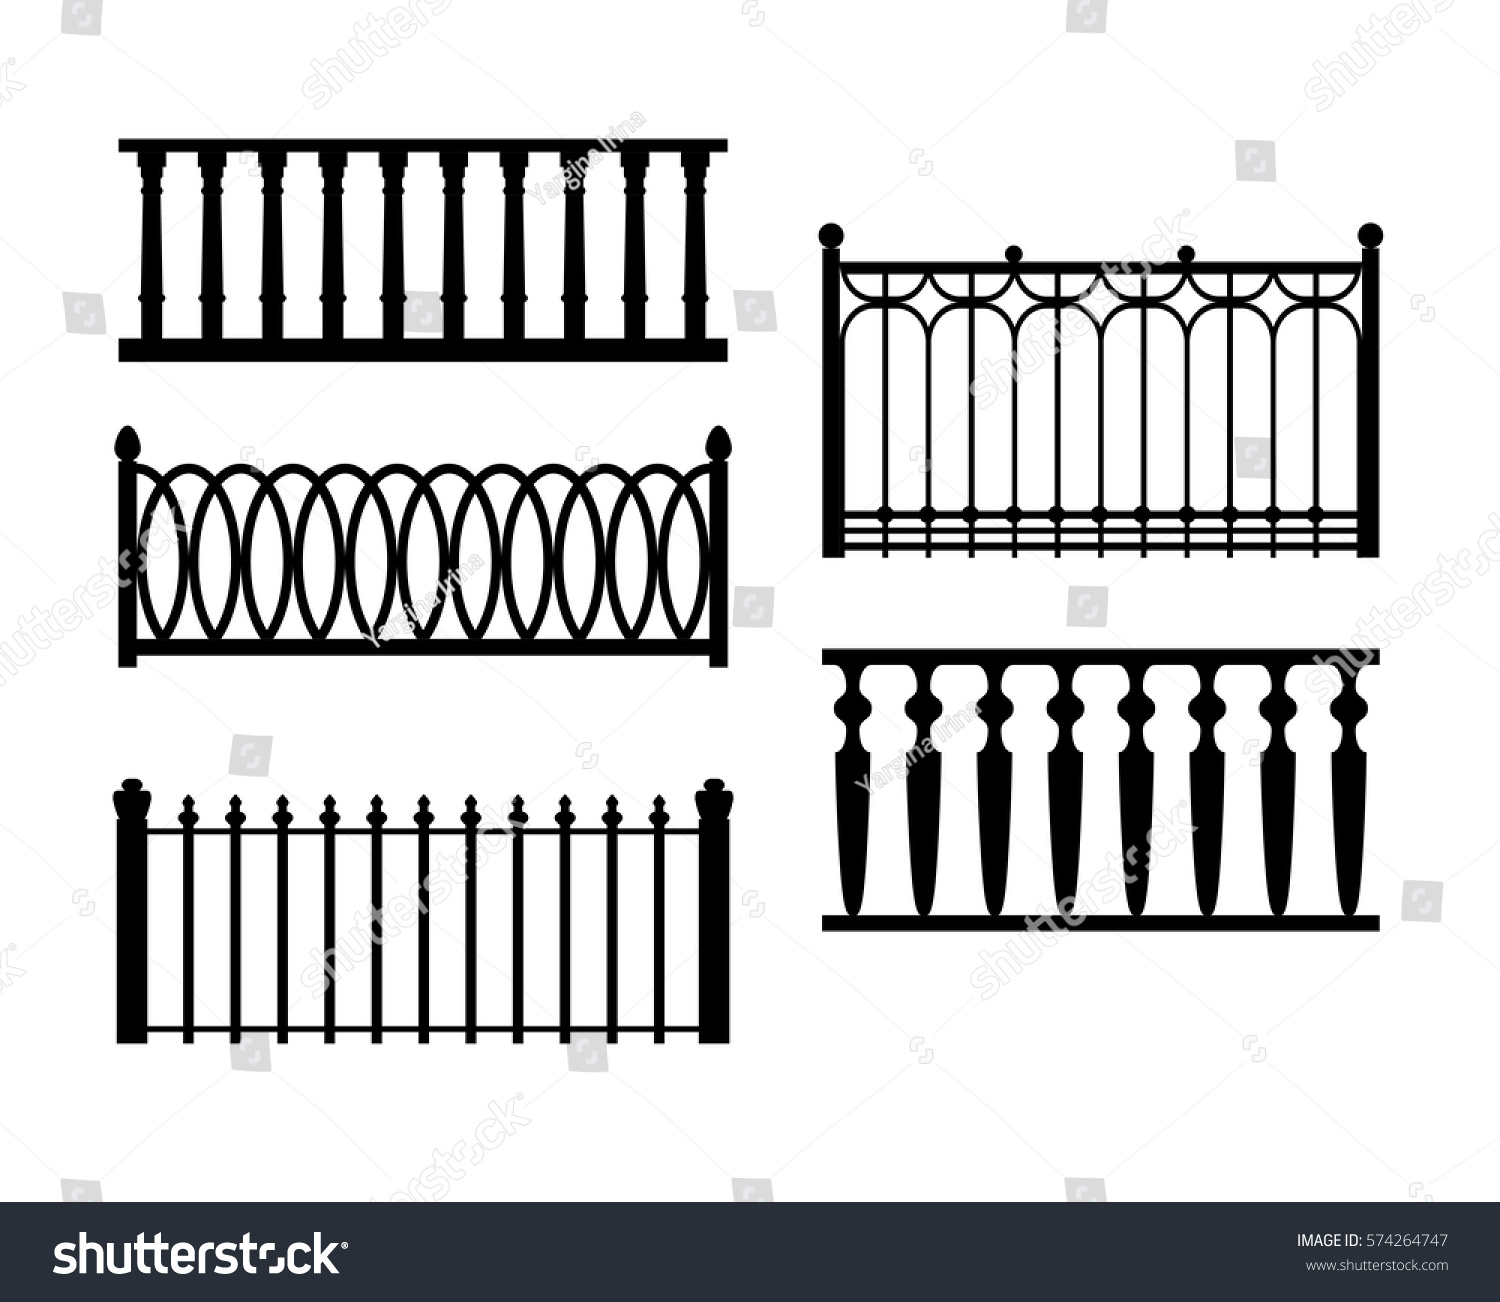 Fence Silhouettes Stock Vector 574264747 - Shutterstock